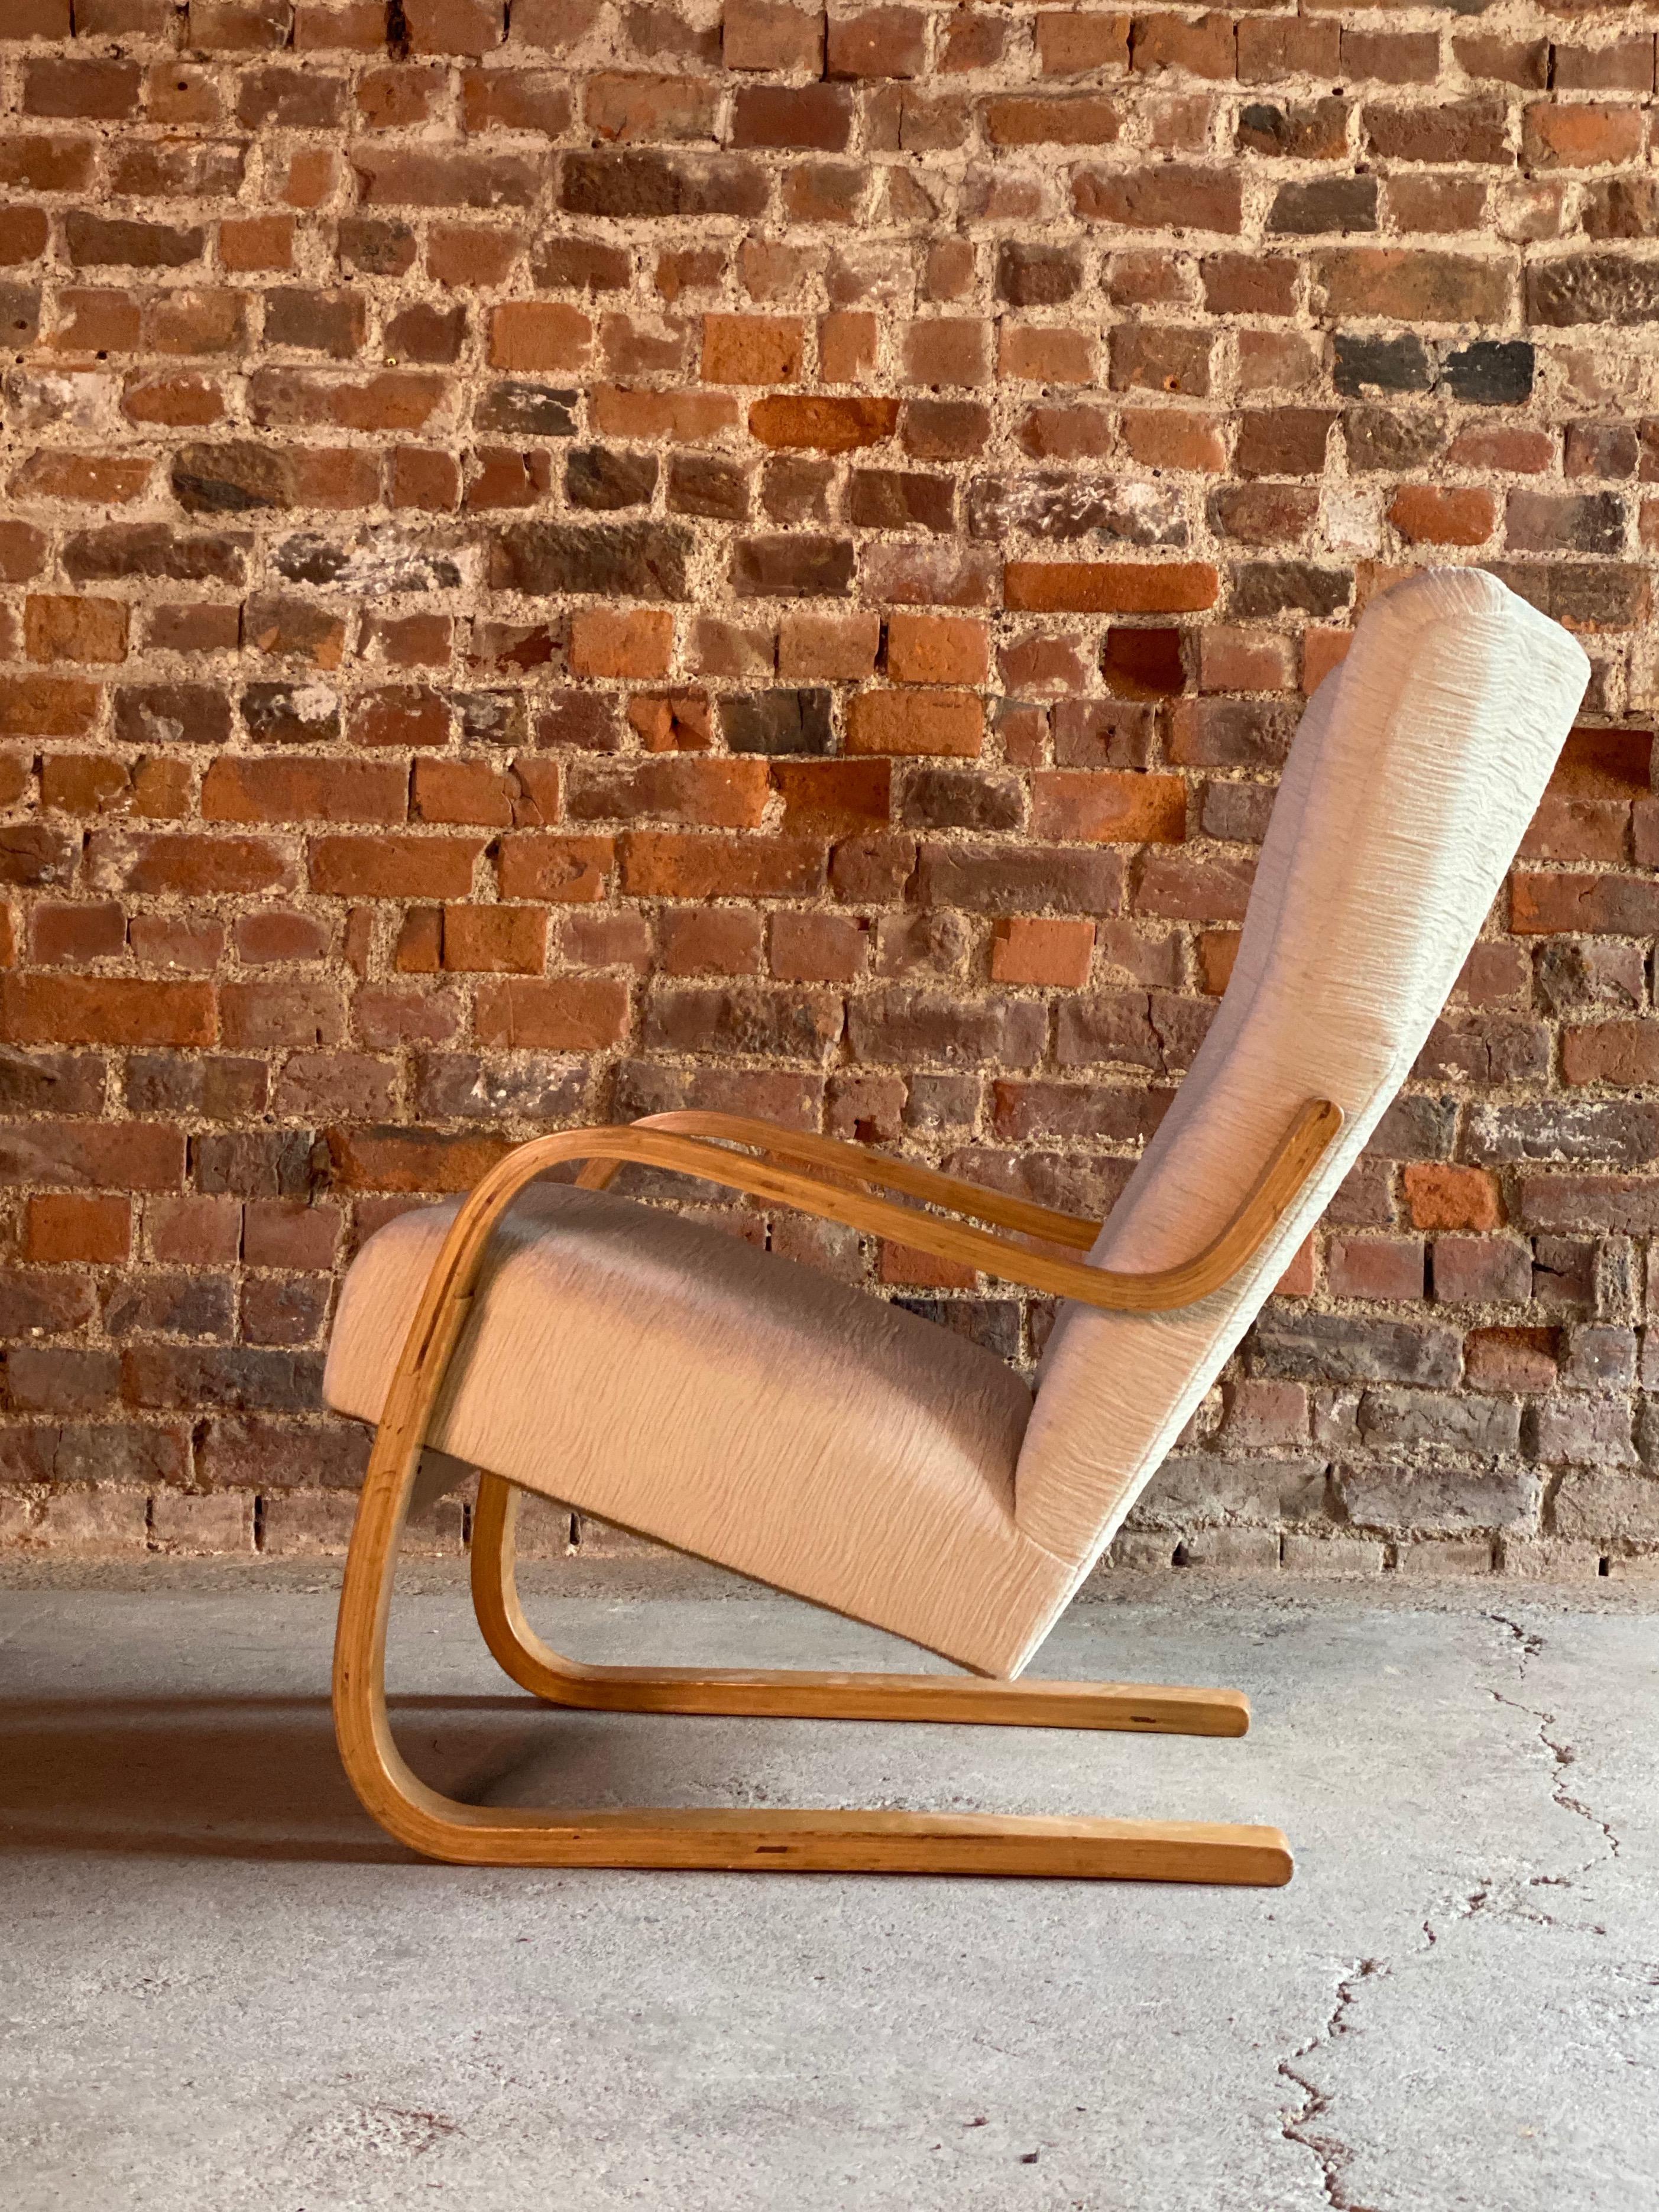 Mid-20th Century Alvar Aalto Model 36 / 401 Cantilever Lounge Chair by Finmar Finland, circa 1940